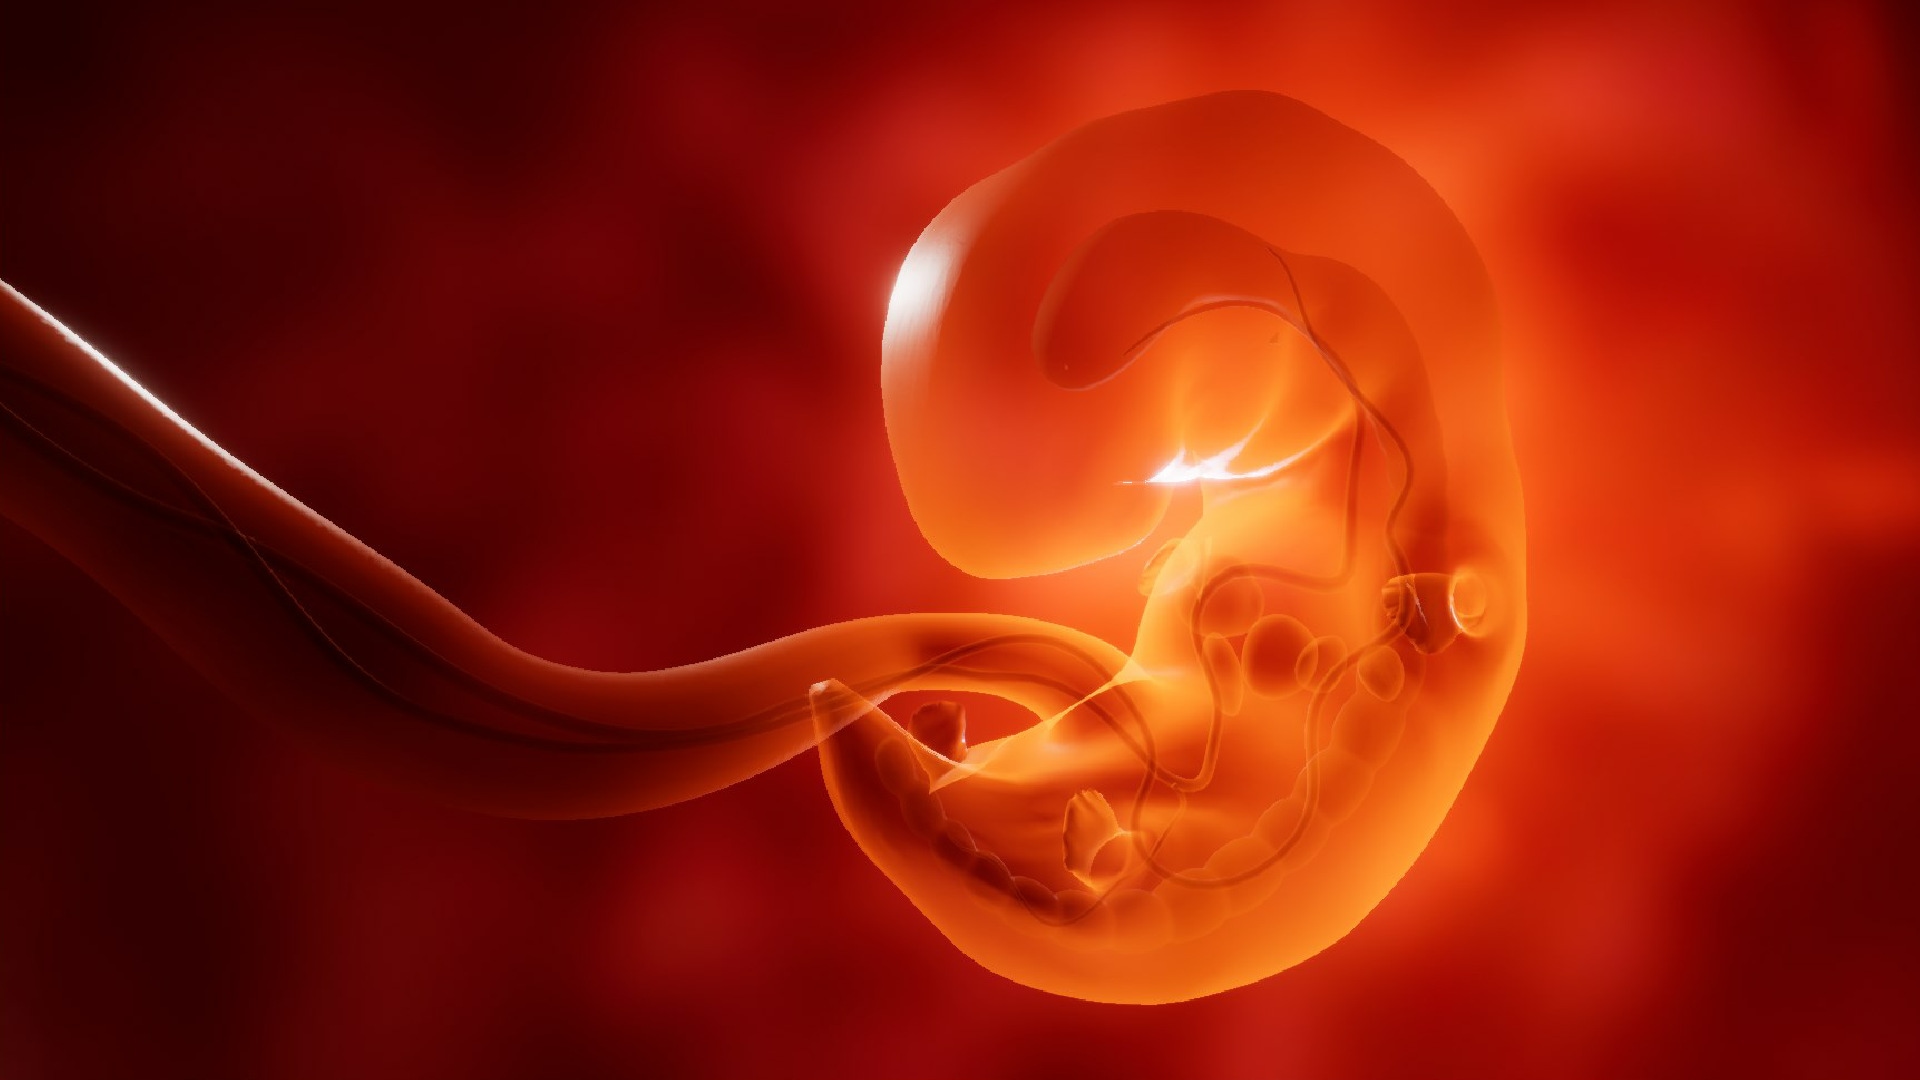 Human embryo animation of development in Environments